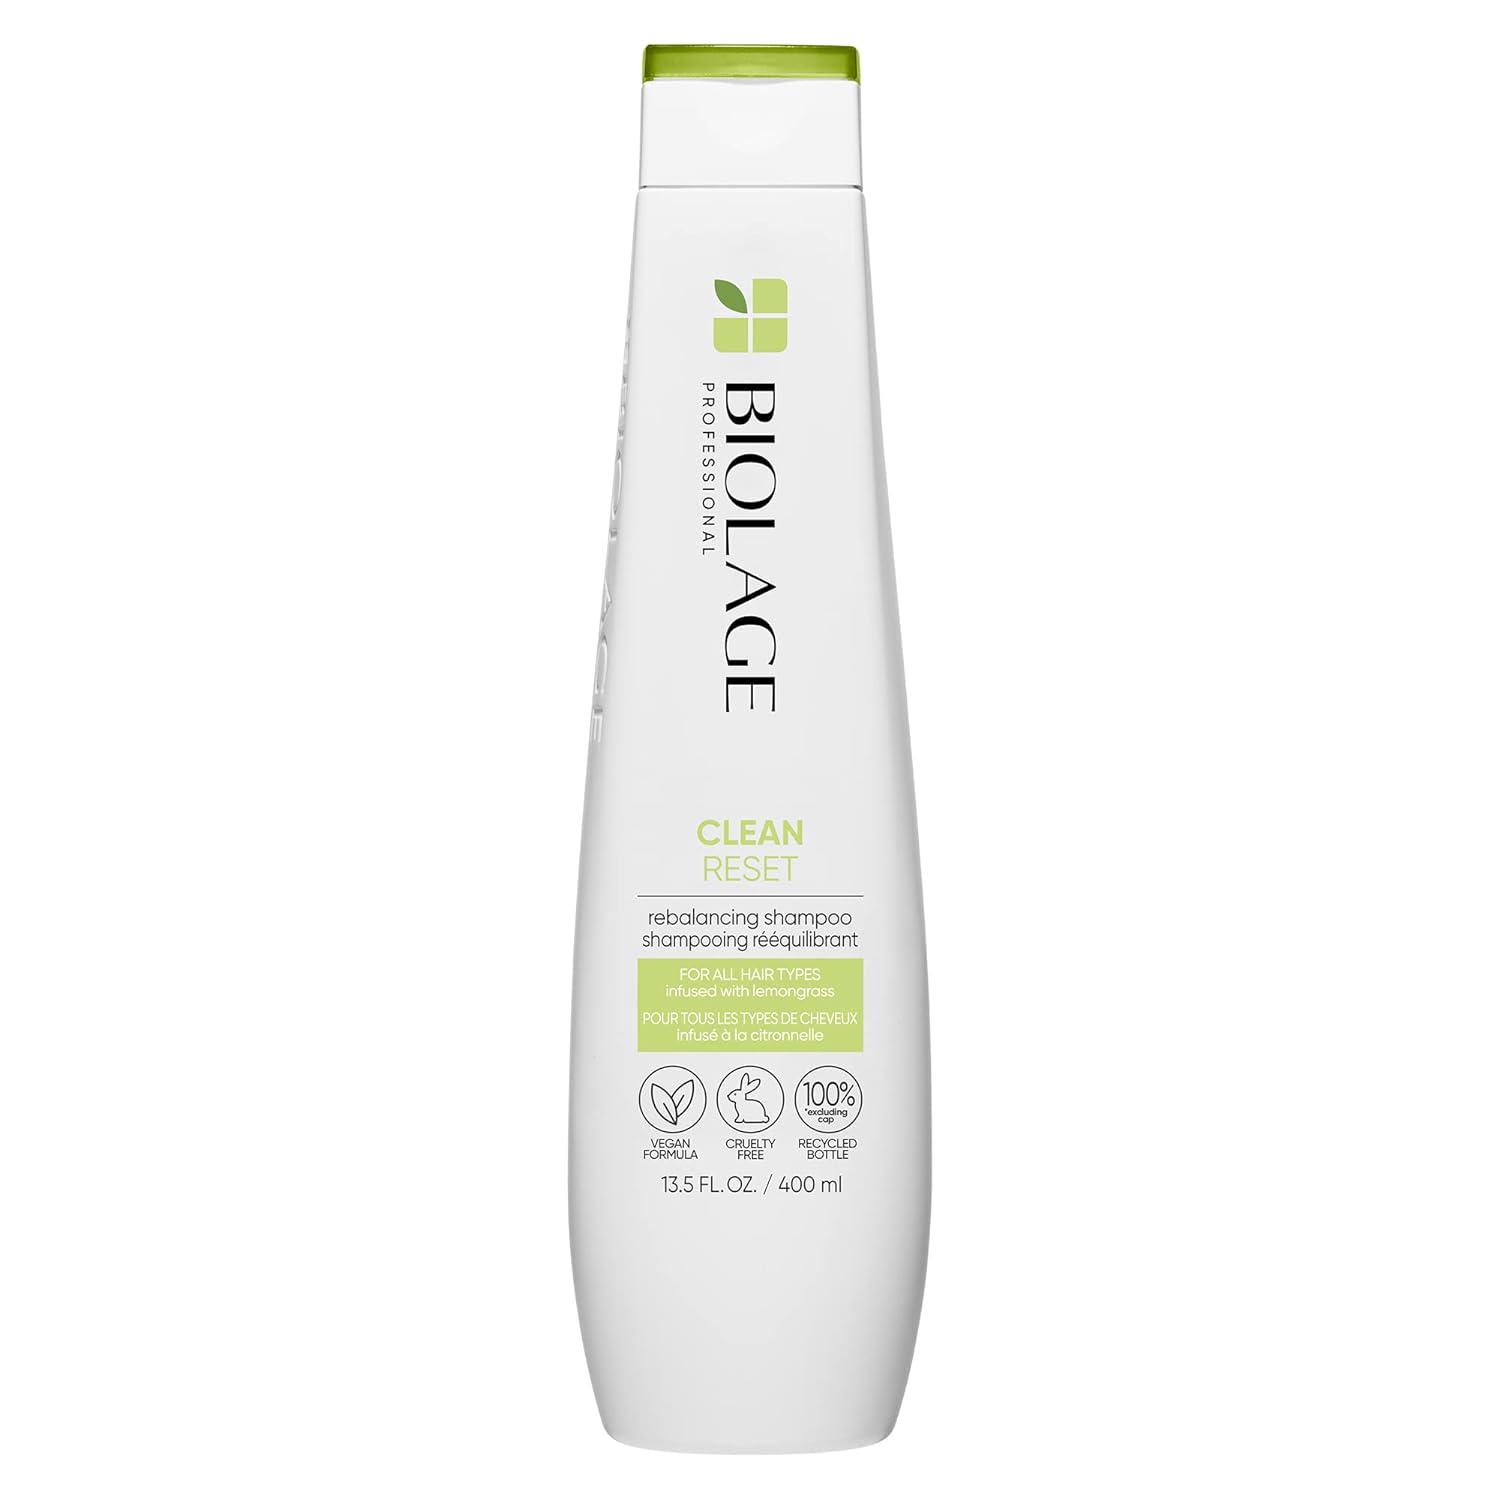 Biolage Normalizing Clean Reset Shampoo | Intense Cleansing Treatment To Remove Buildup | For All Hair Types | Paraben-Free | Vegan | Cruelty Free | Clarifying Salon Shampoo